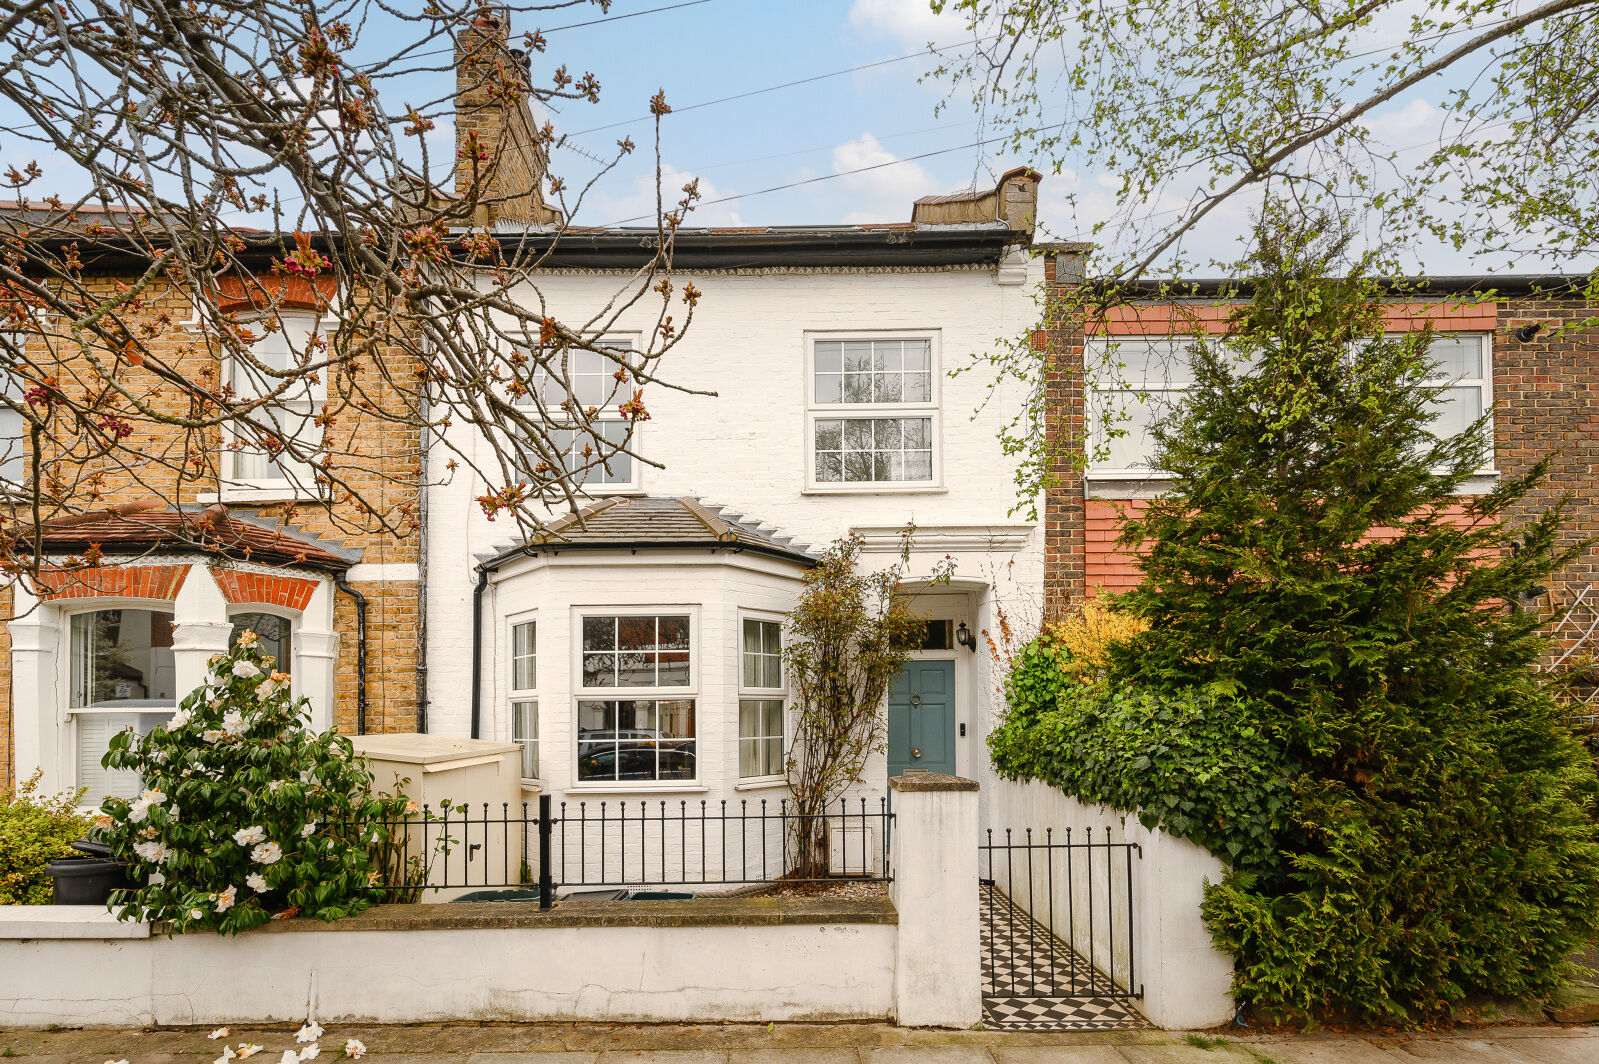 4 bedroom mid terraced house for sale Graham Road, Wimbledon, SW19, main image